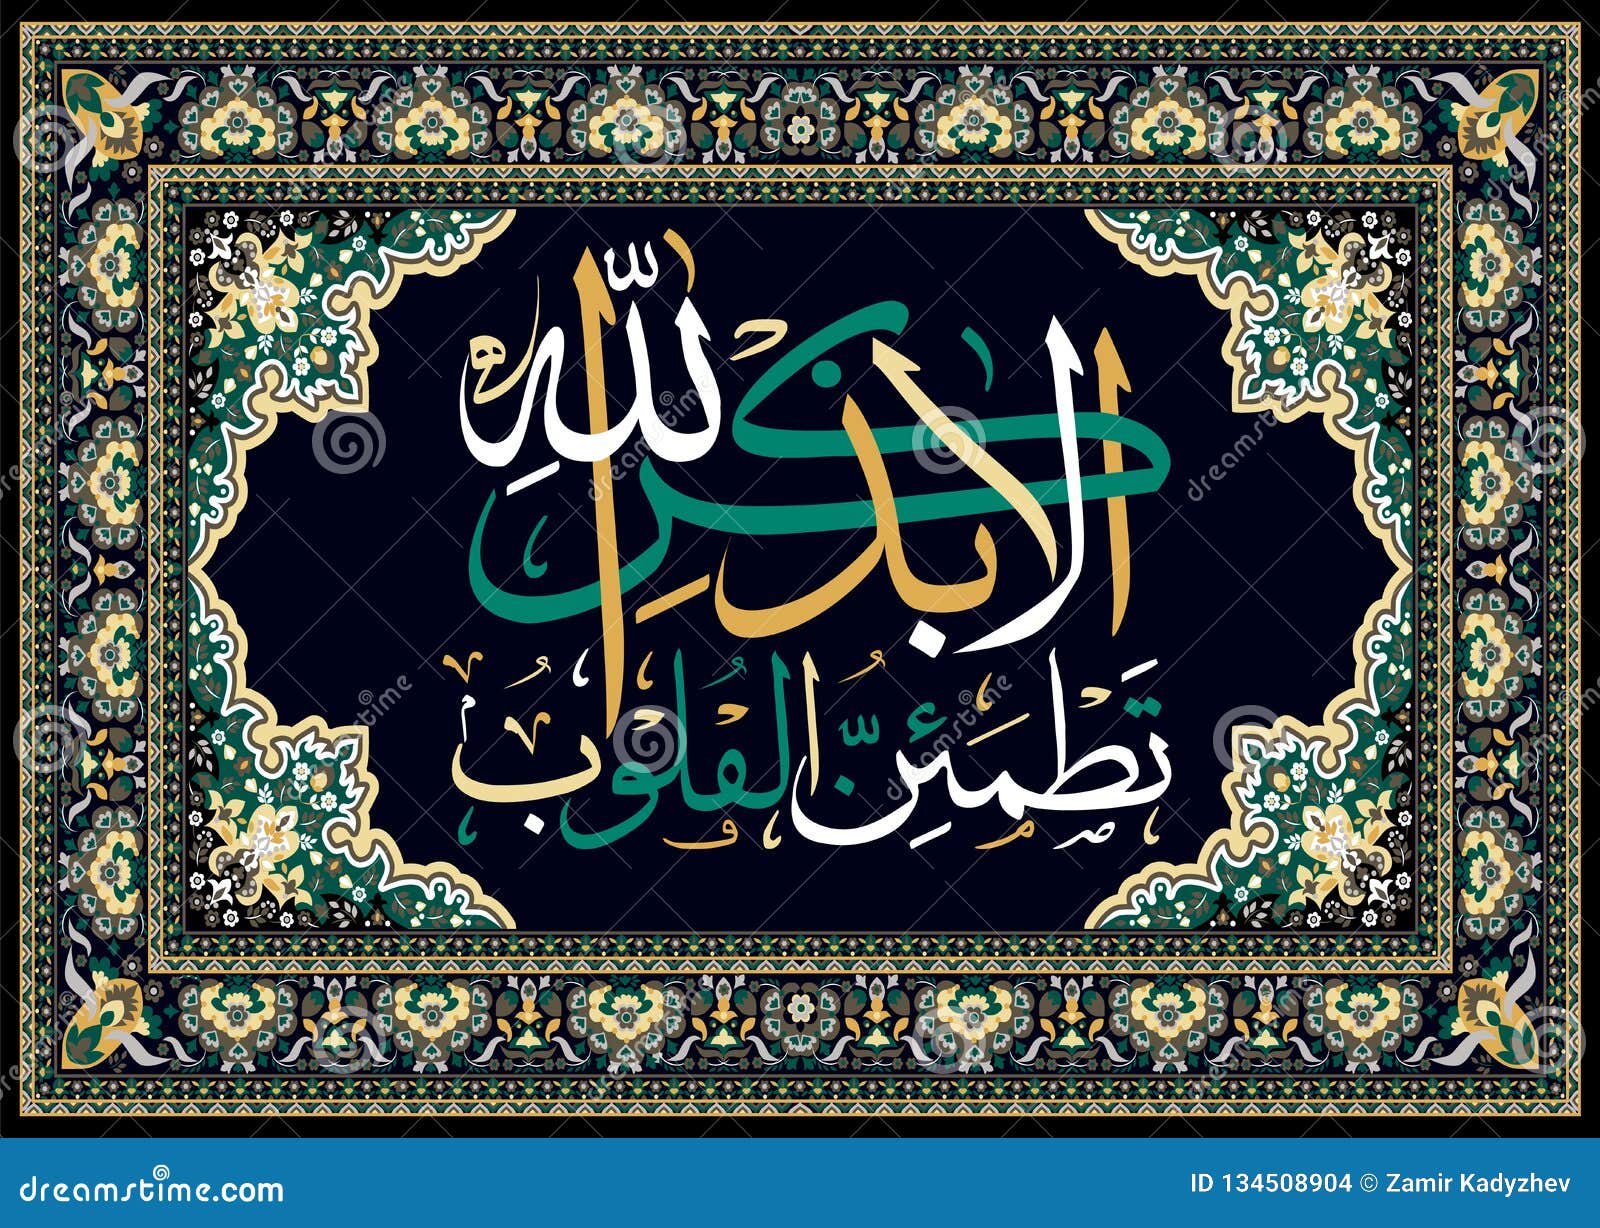 islamic quran calligraphy verily in the rememberance of allah ta`ala do our hearts find peace and comfort.